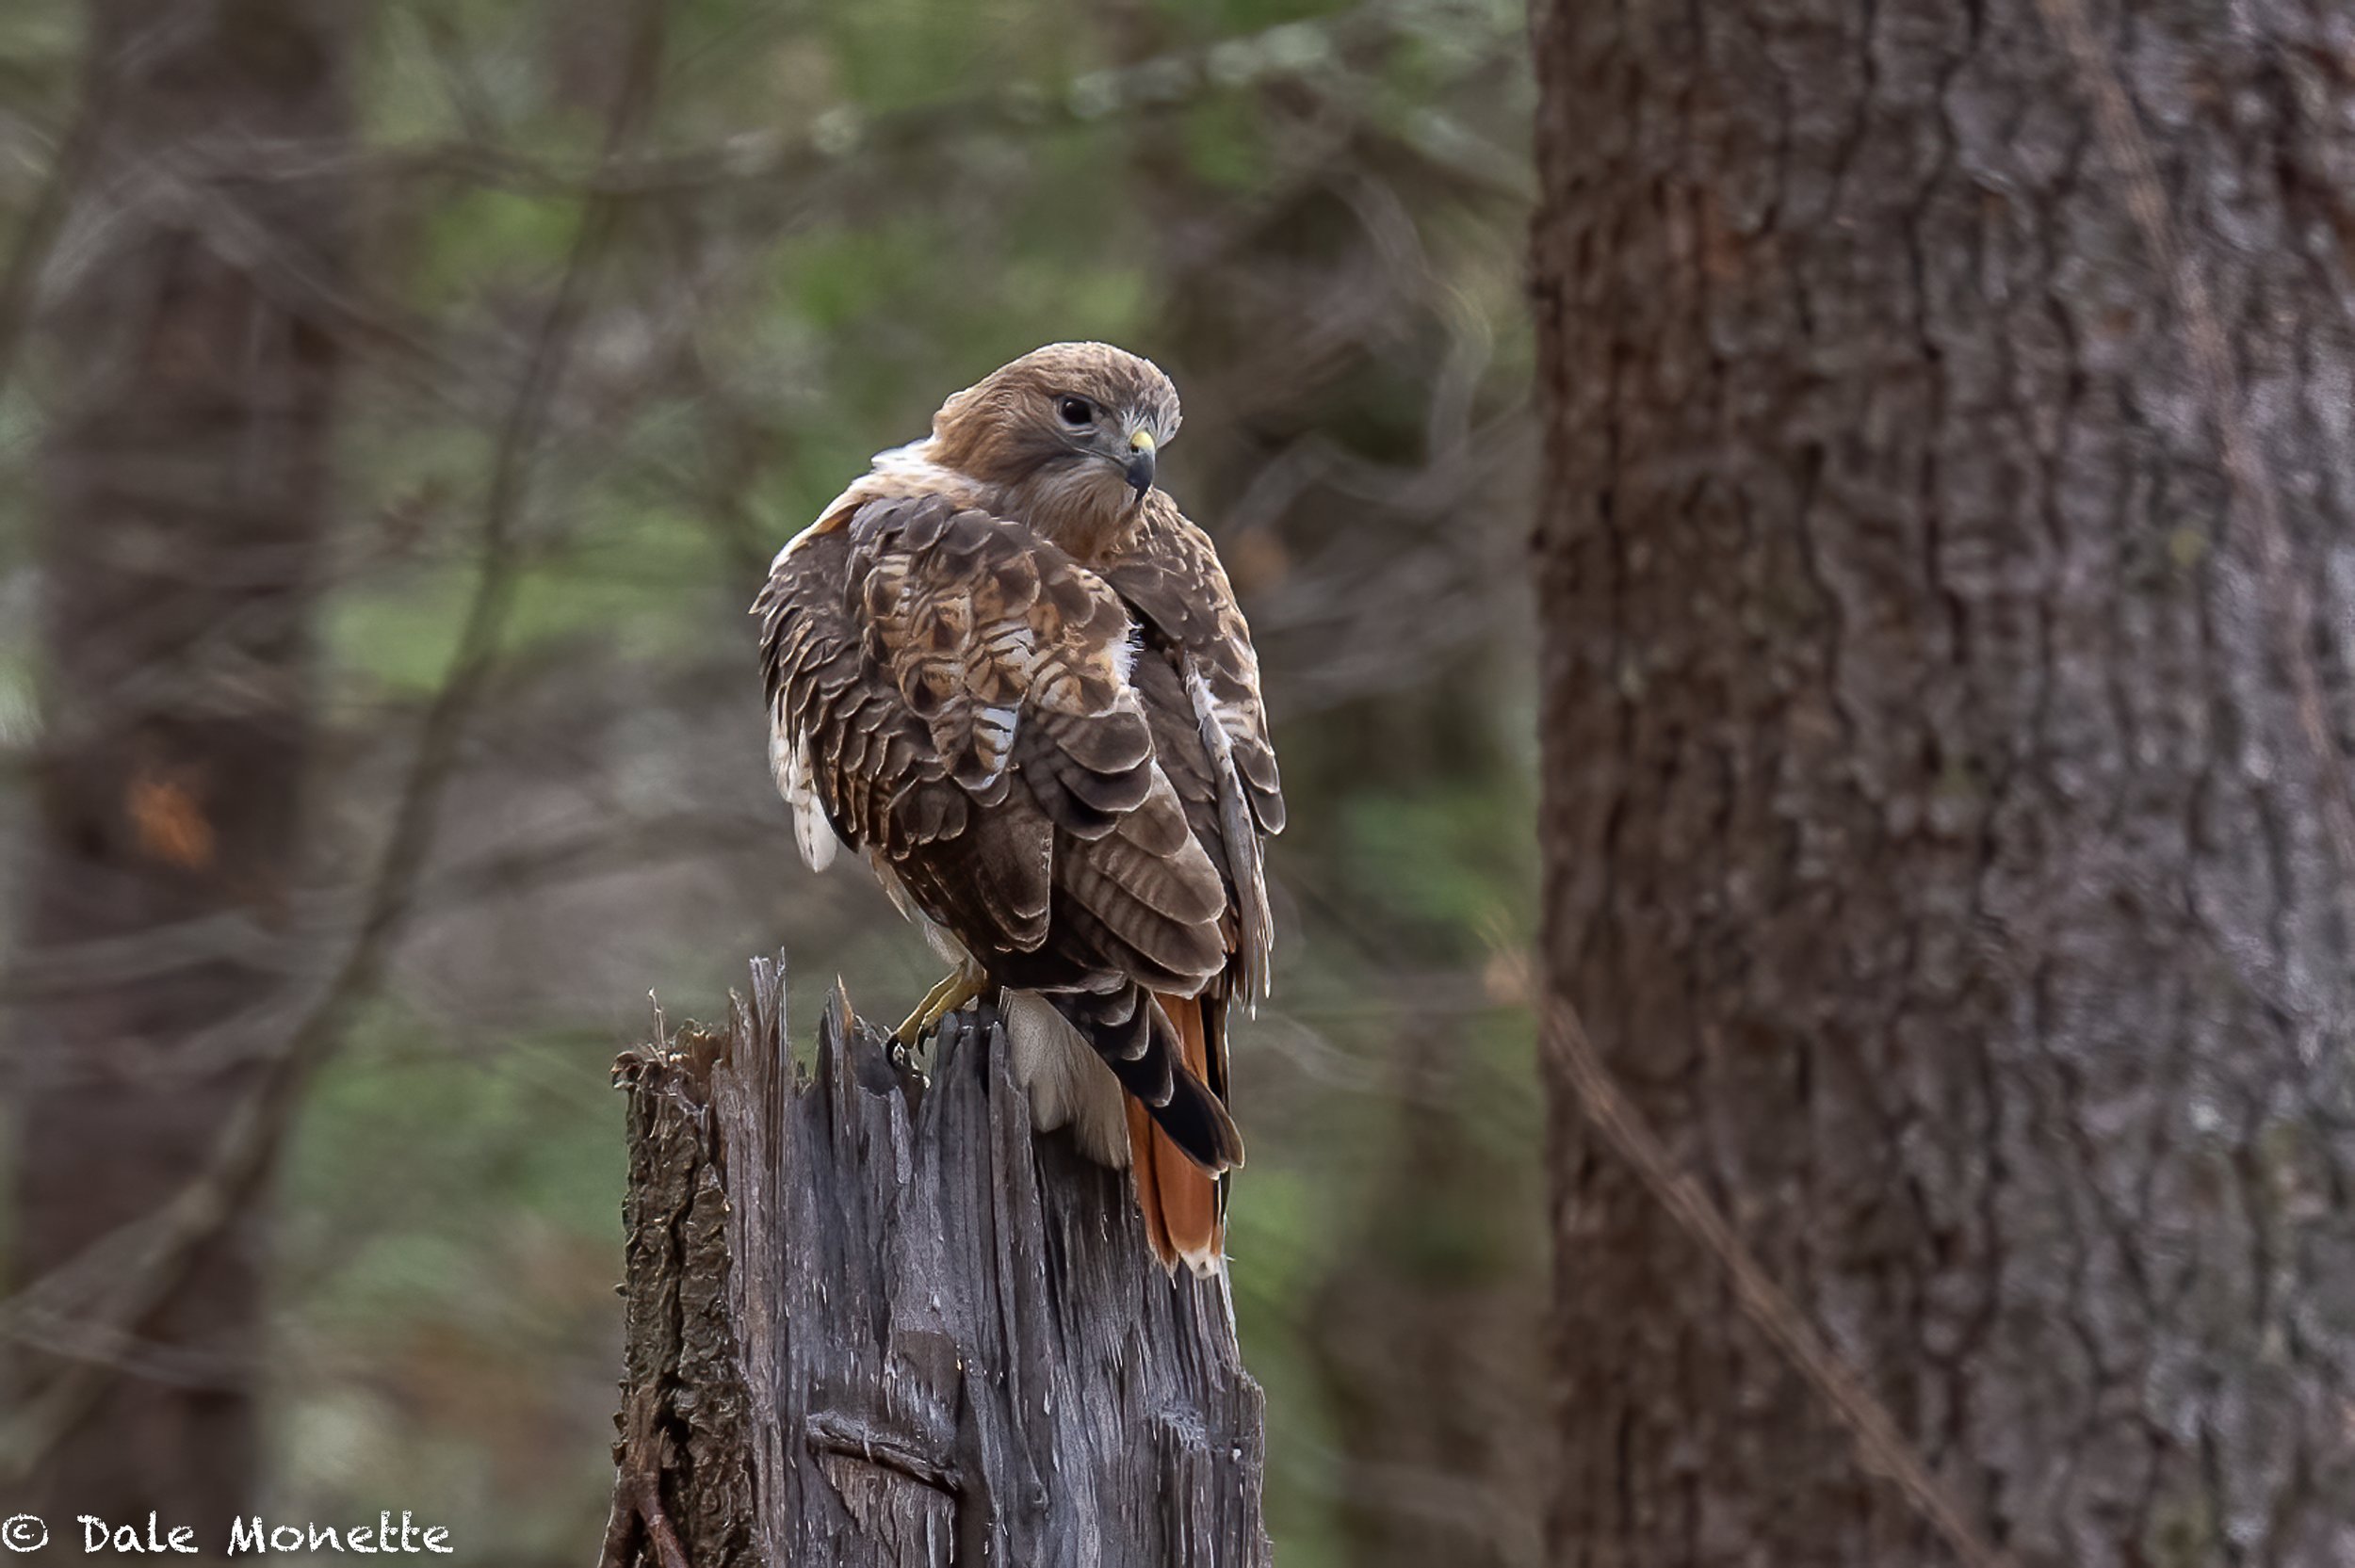   It was a very good year for red tail hawks.  They seem to be everywhere.    